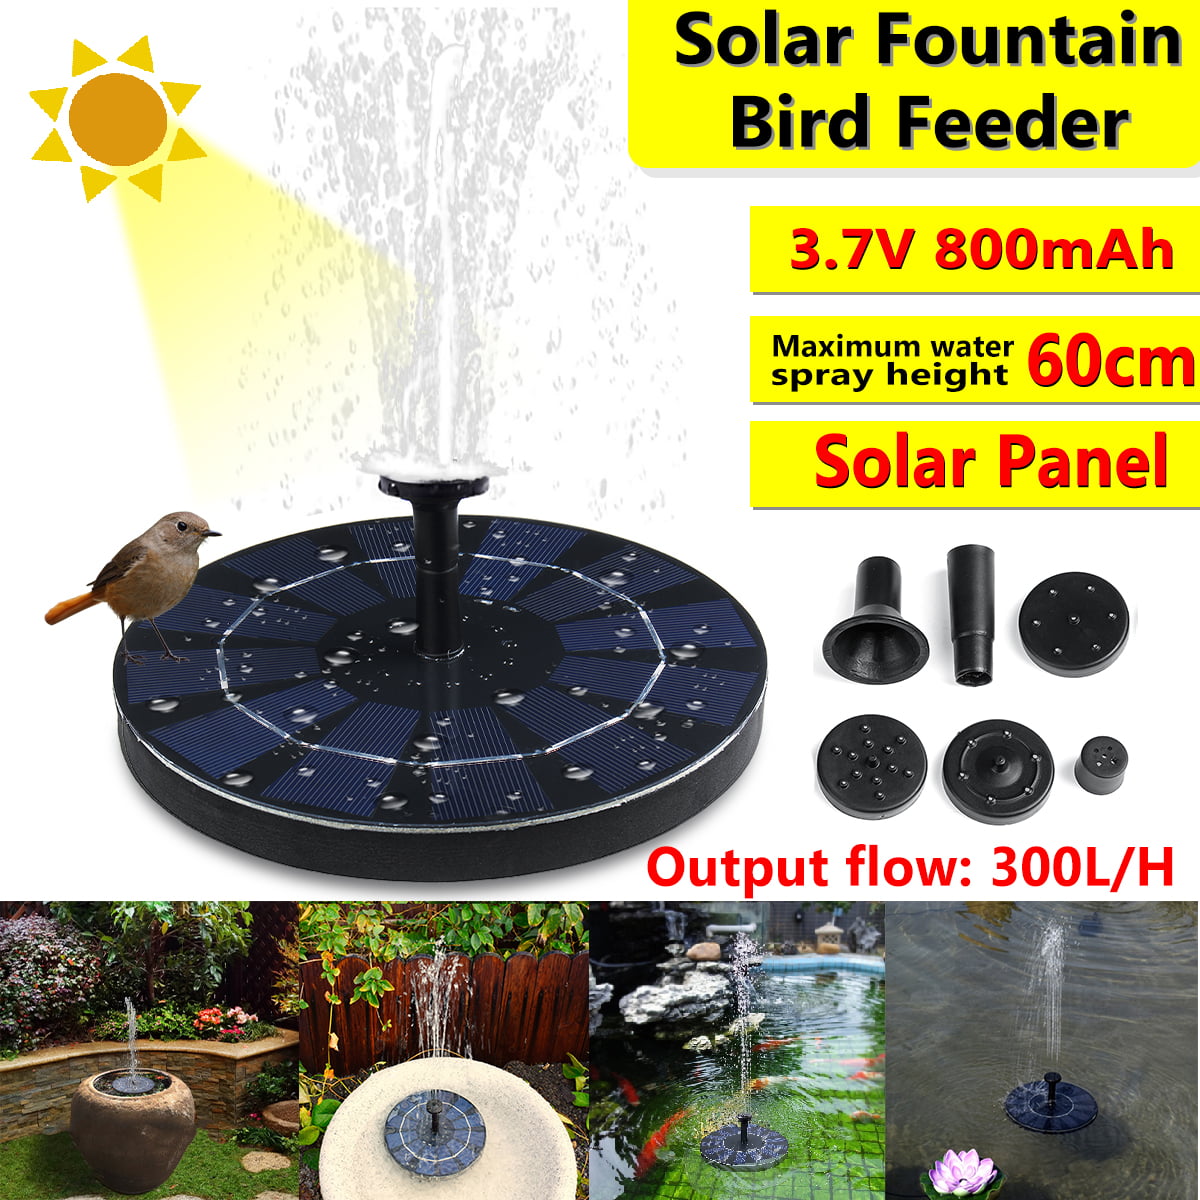 Solar Power Submersible Floating Fountain Garden Pool Pond Water Pump Display JL 